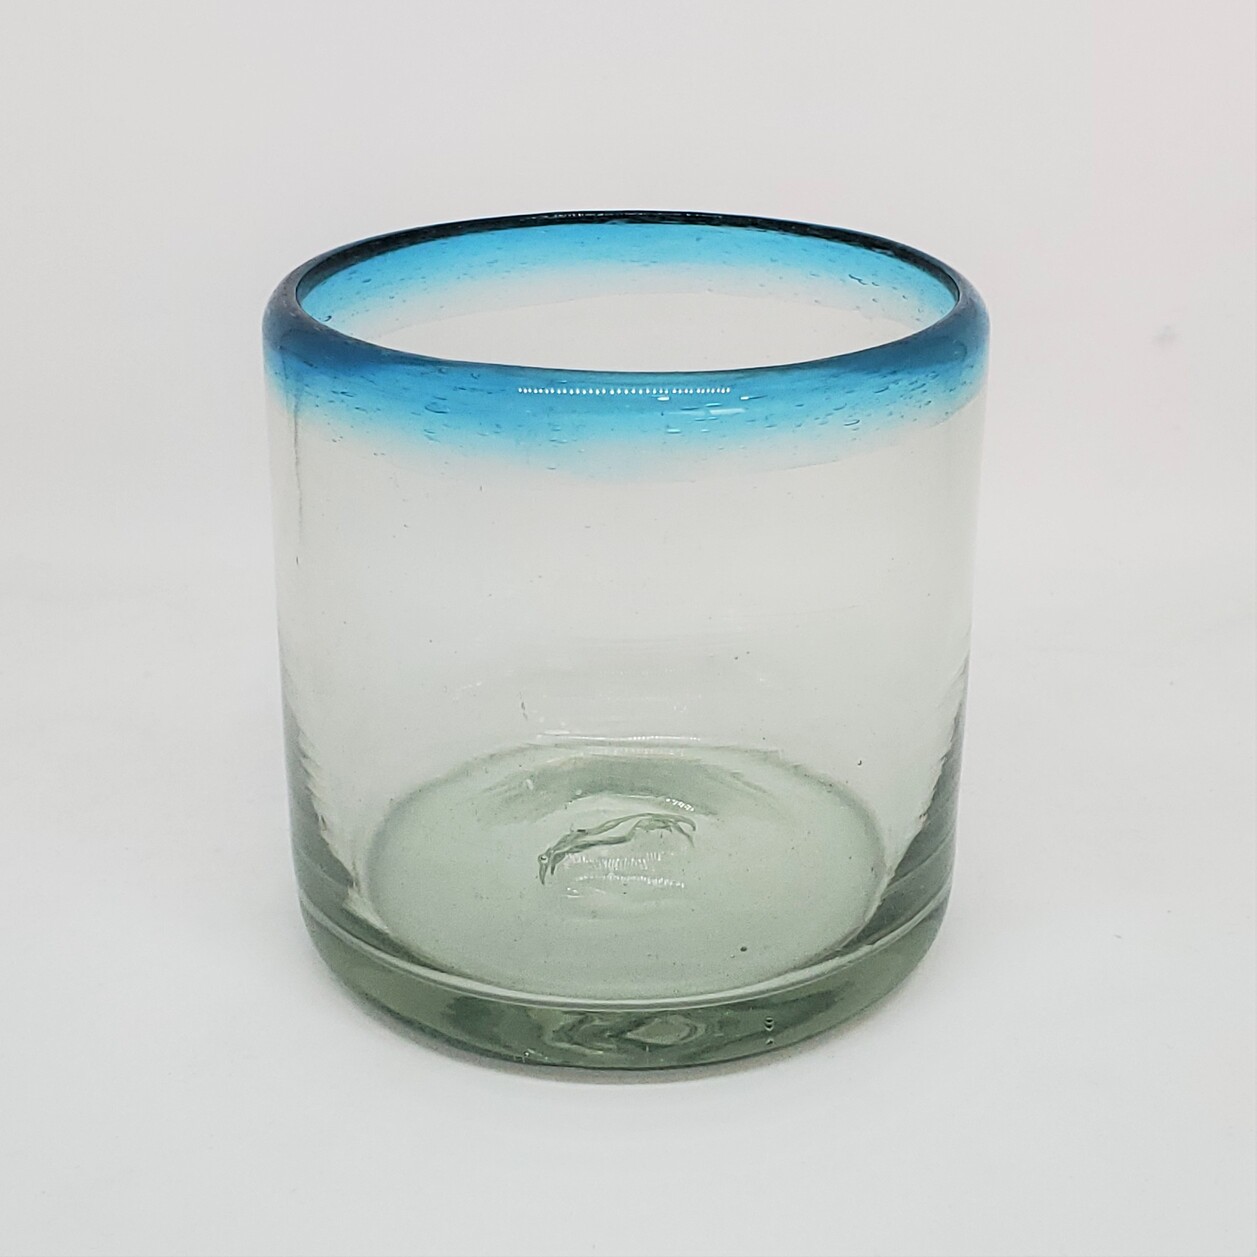 MEXICAN GLASSWARE / Aqua Blue Rim 8 oz DOF Rocks Glasses (set of 6) / These glasses are just the right size to enjoy fresh squeezed fruit juice in the moning.